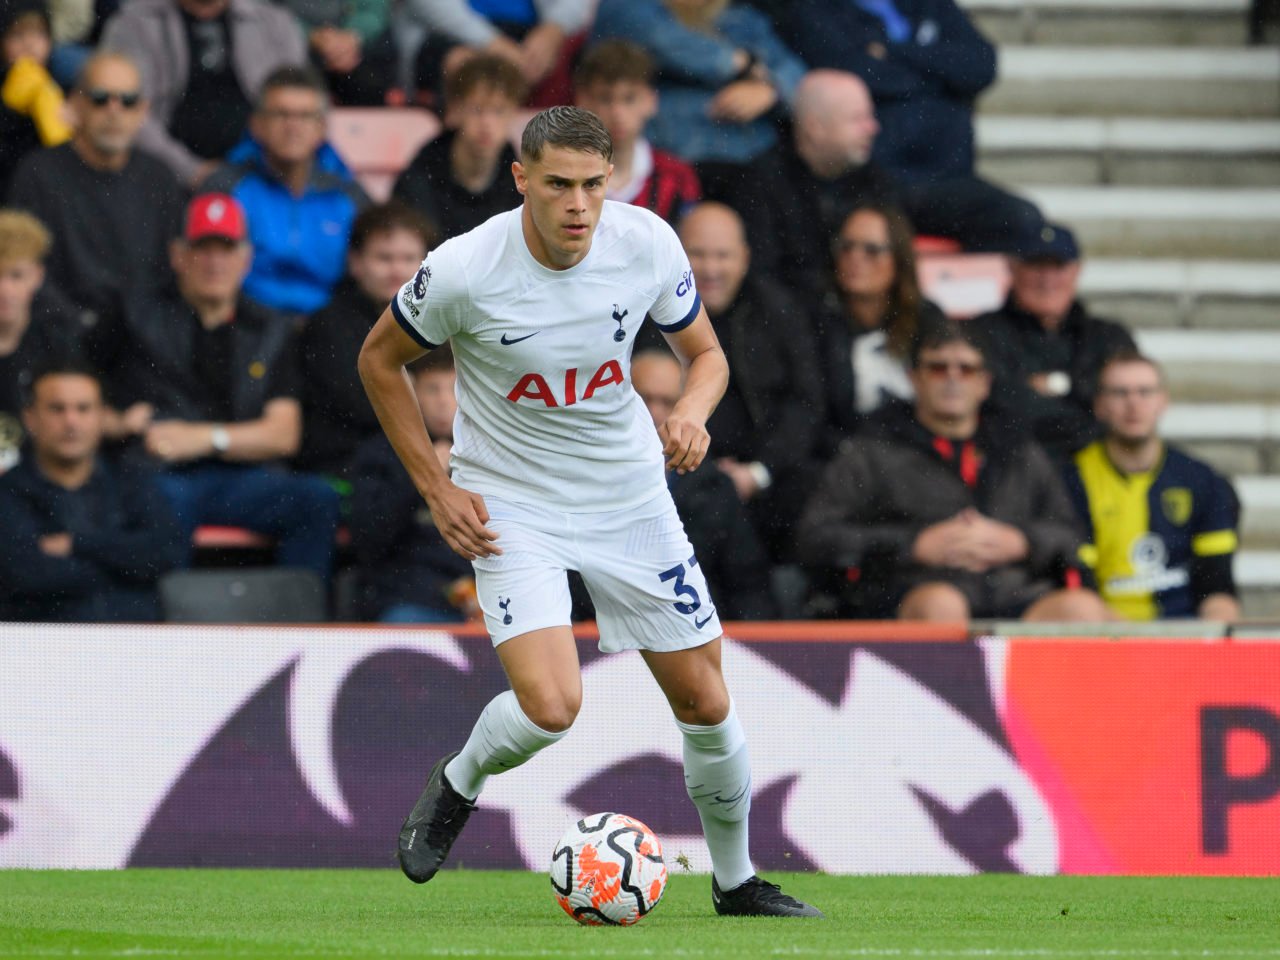 Micky Van de Ven admits he watched videos of Spurs legend to improve his game